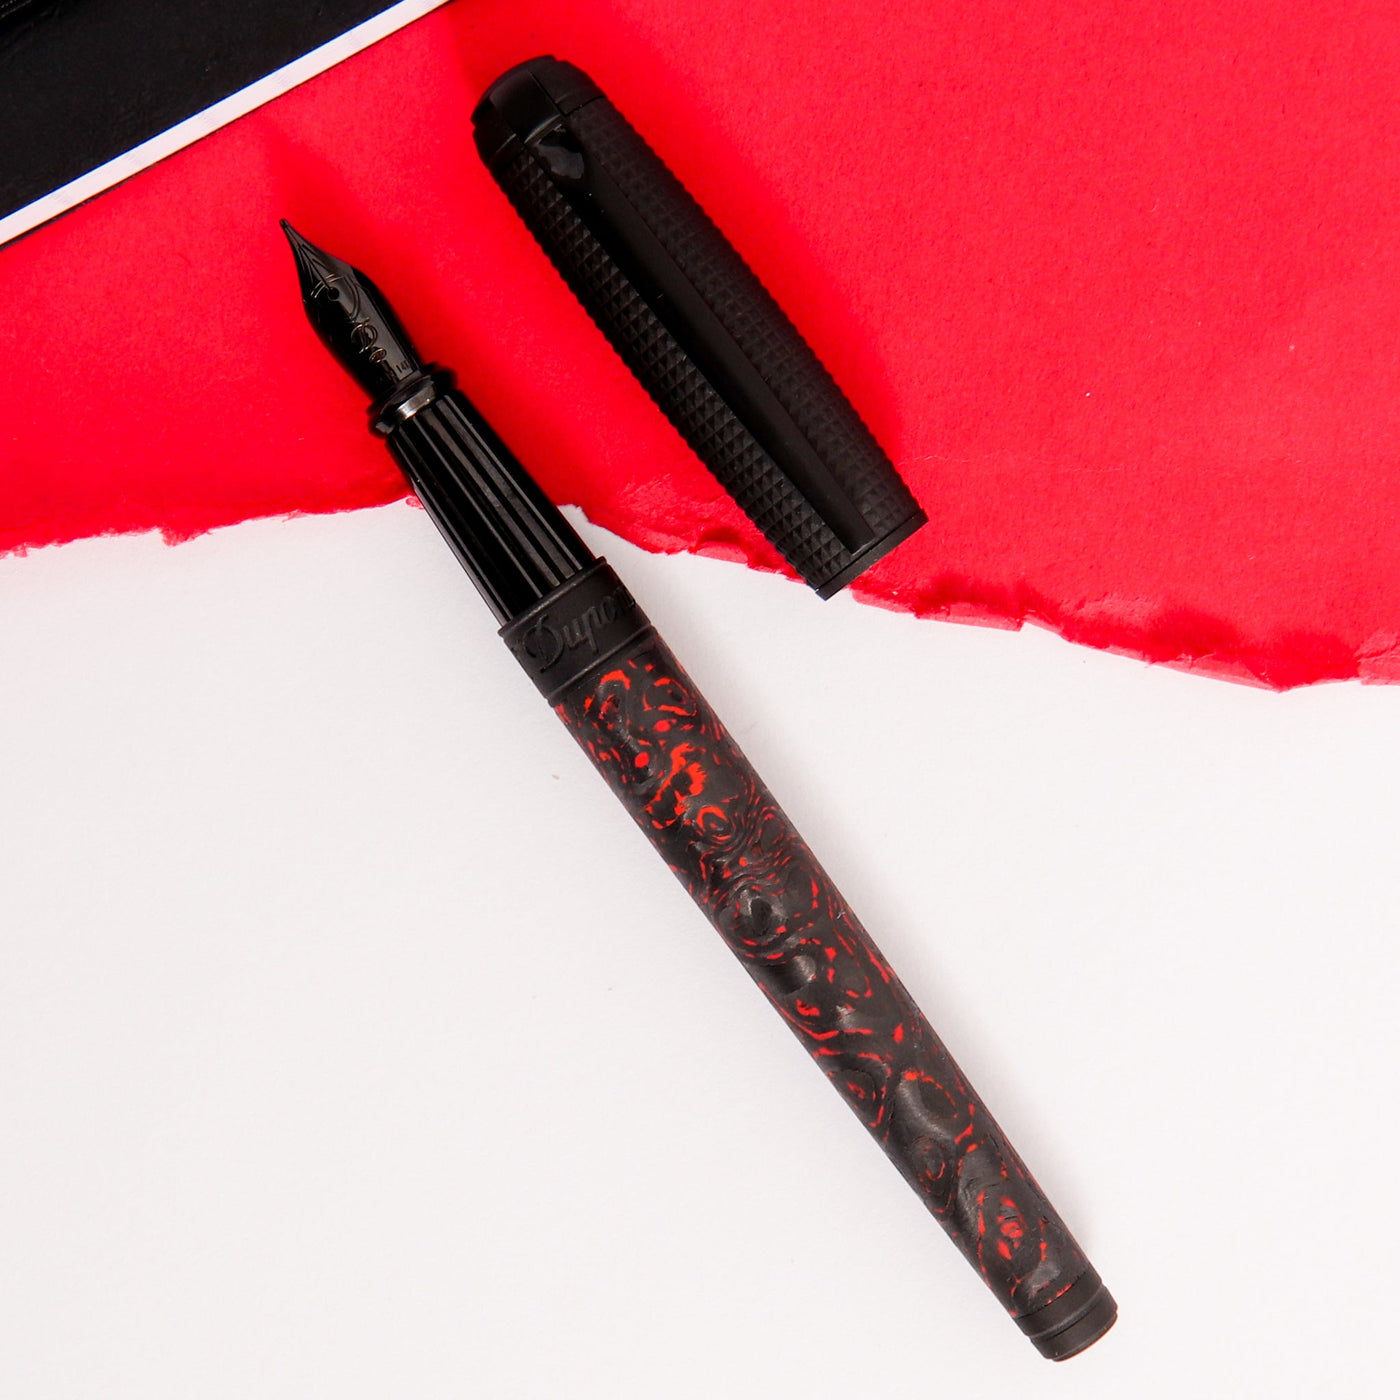 ST-Dupont-Line-D-Large-Carbon-Fiery-Lava-Fountain-Pen-Red-And-Black